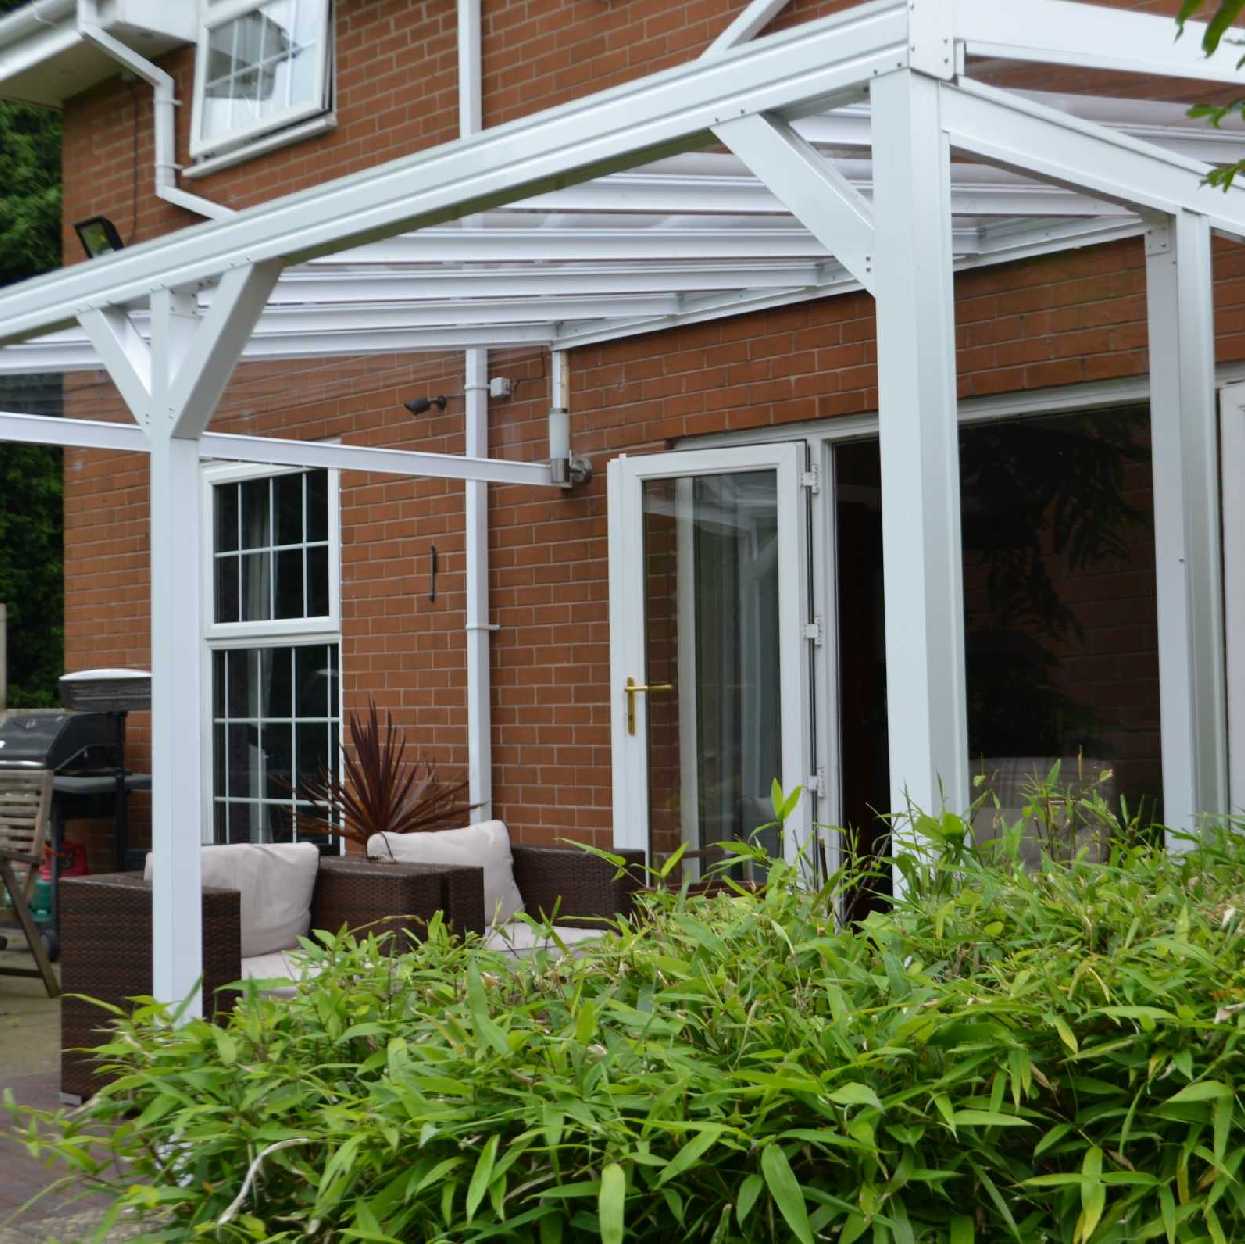 Omega Smart Lean-To Canopy, White UNGLAZED for 6mm Glazing - 2.8m (W) x 1.5m (P), (2) Supporting Posts from Omega Build